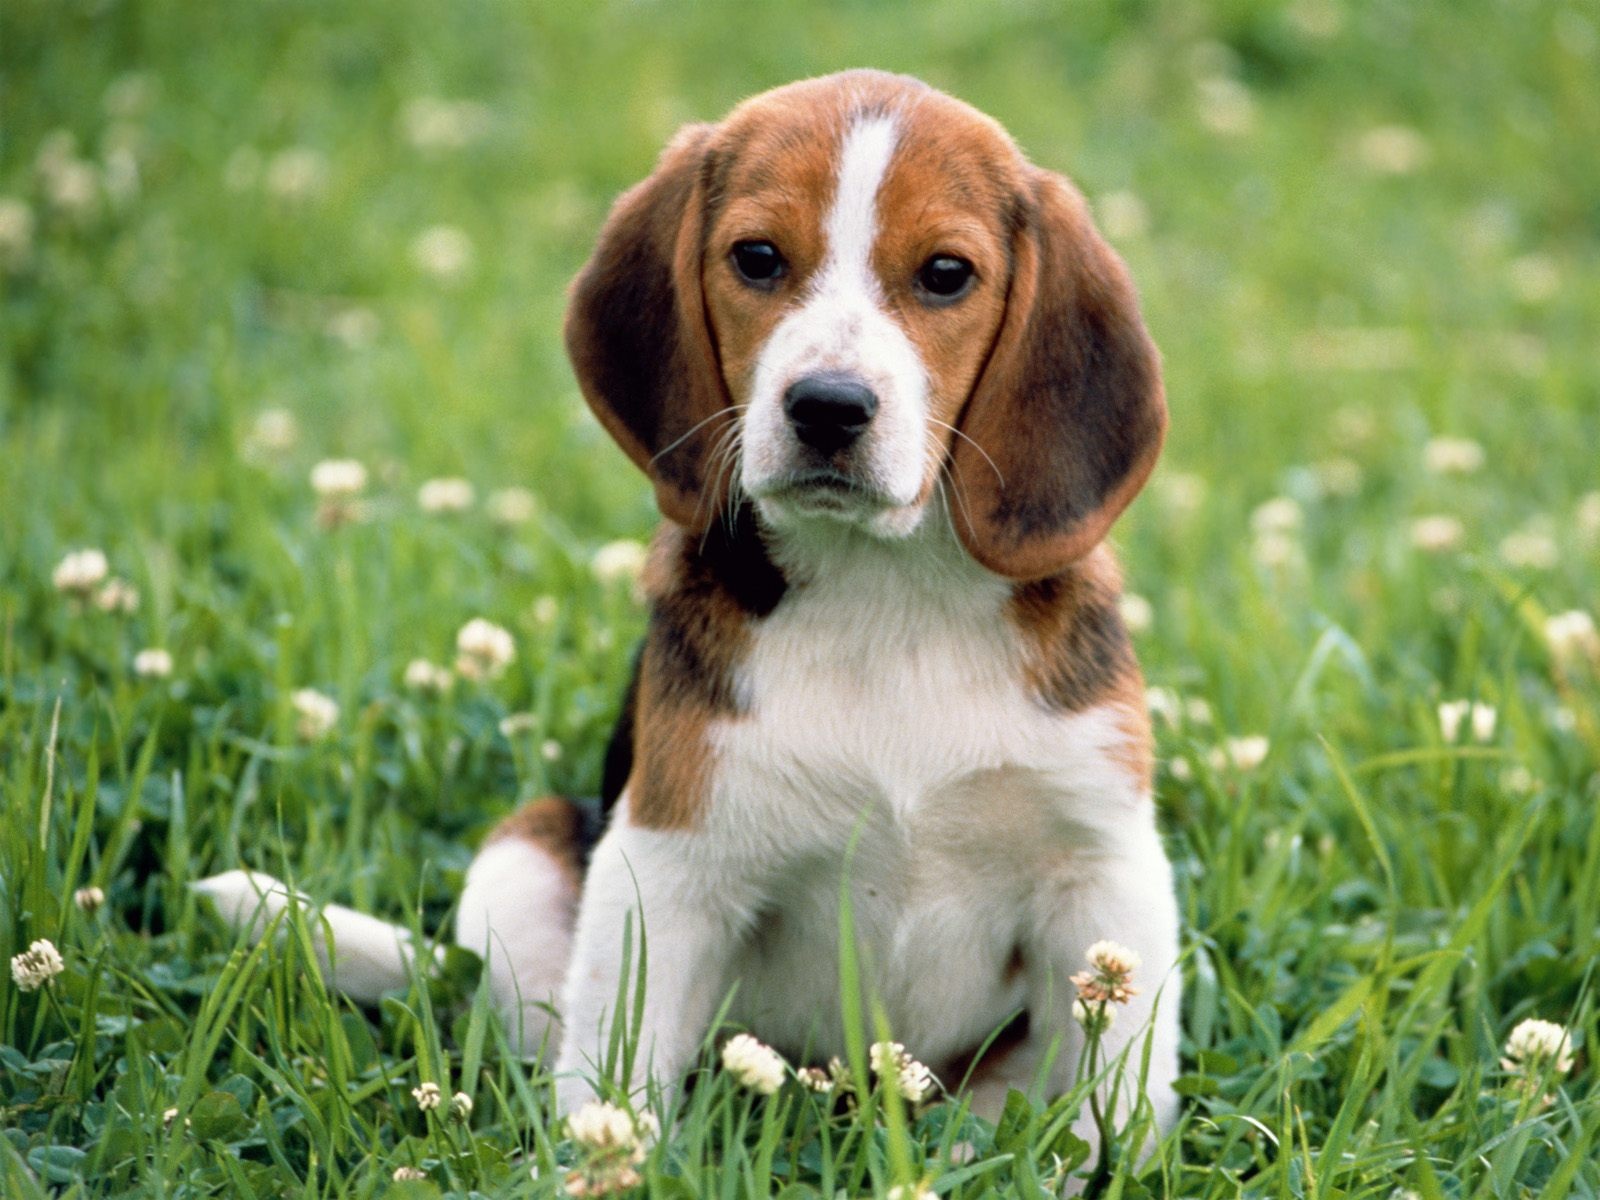 Kerry Beagle Puppies: Kerry Puppy Pictures Funny Animals Puppies Breed